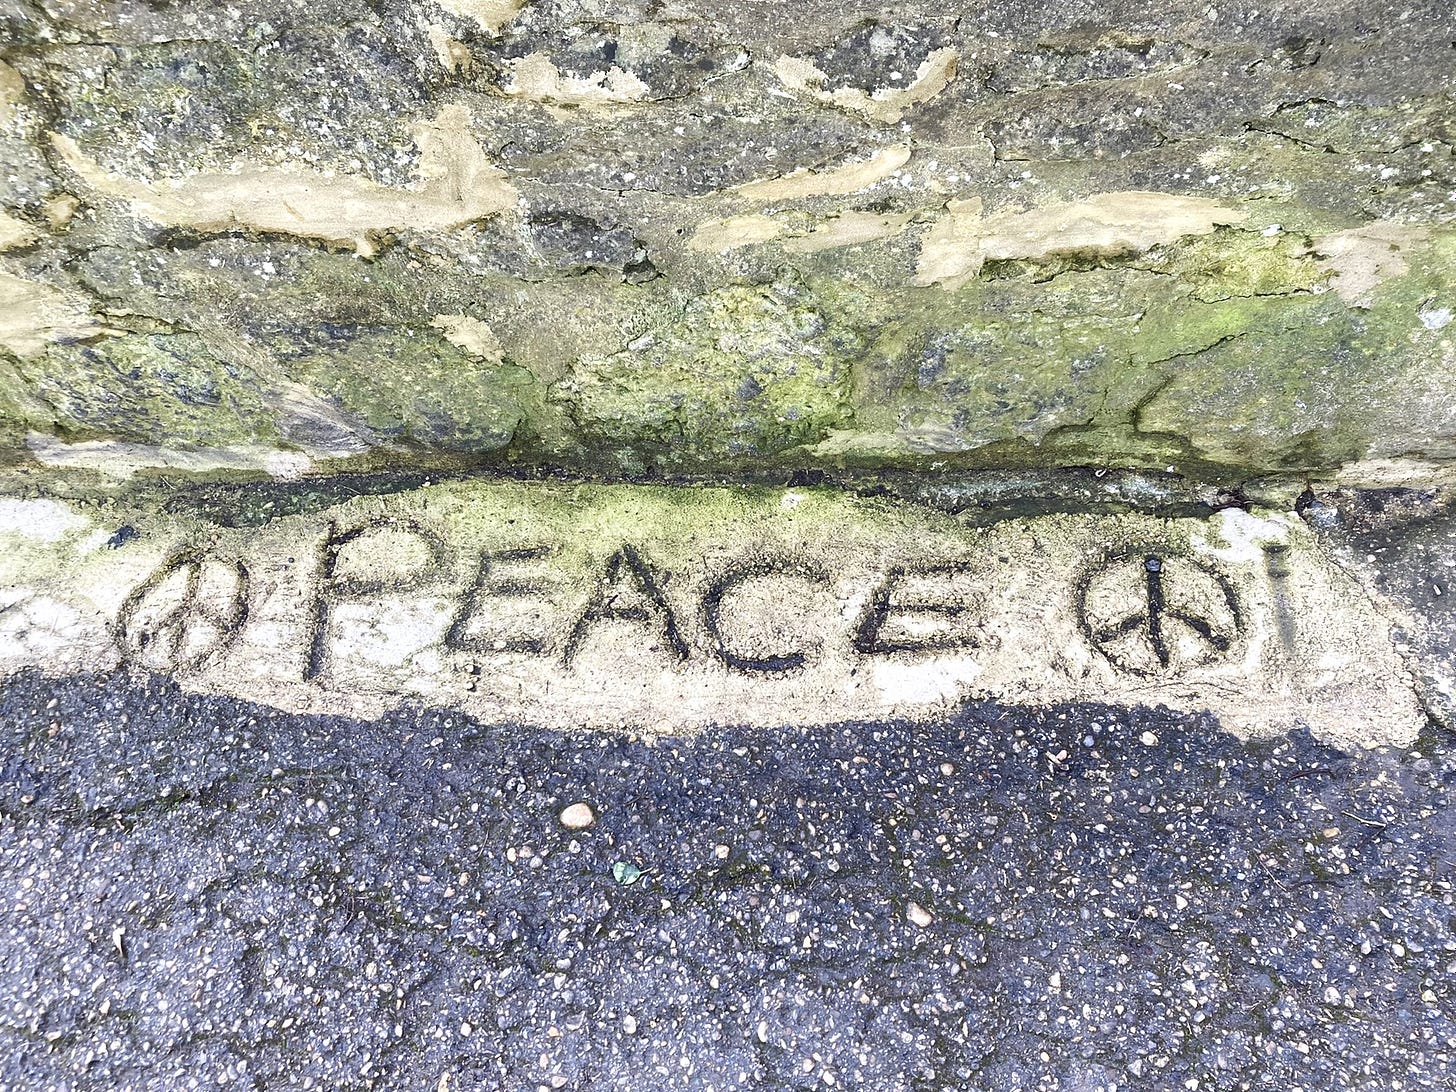 Someone has tried to repair a hole in tarmac with concrete. In the concrete they have written PEACE, in-between two peace signs.